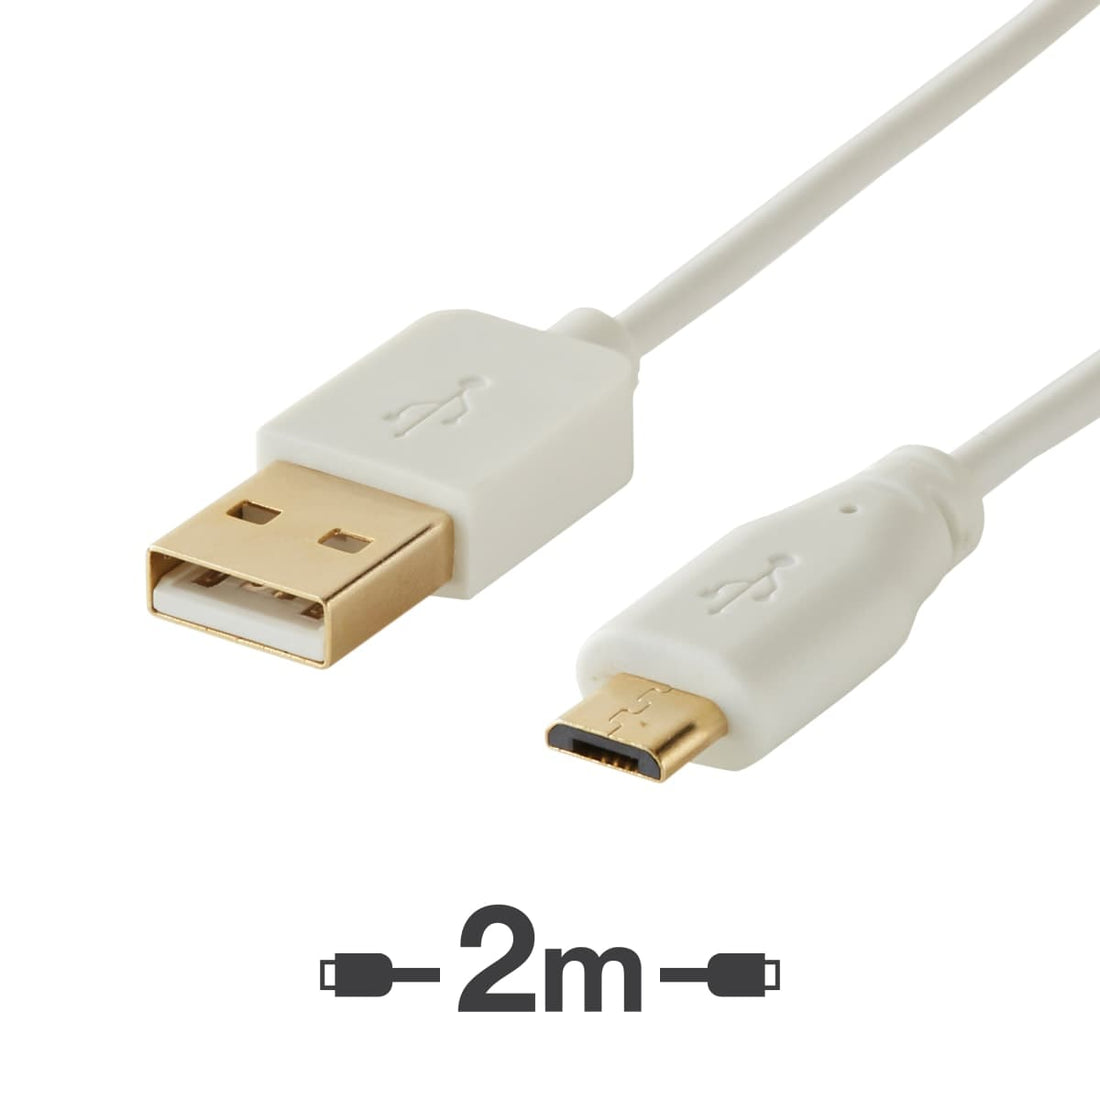 2 M USB 2.0 TYPE A/MICRO USB CABLE - best price from Maltashopper.com BR420005277